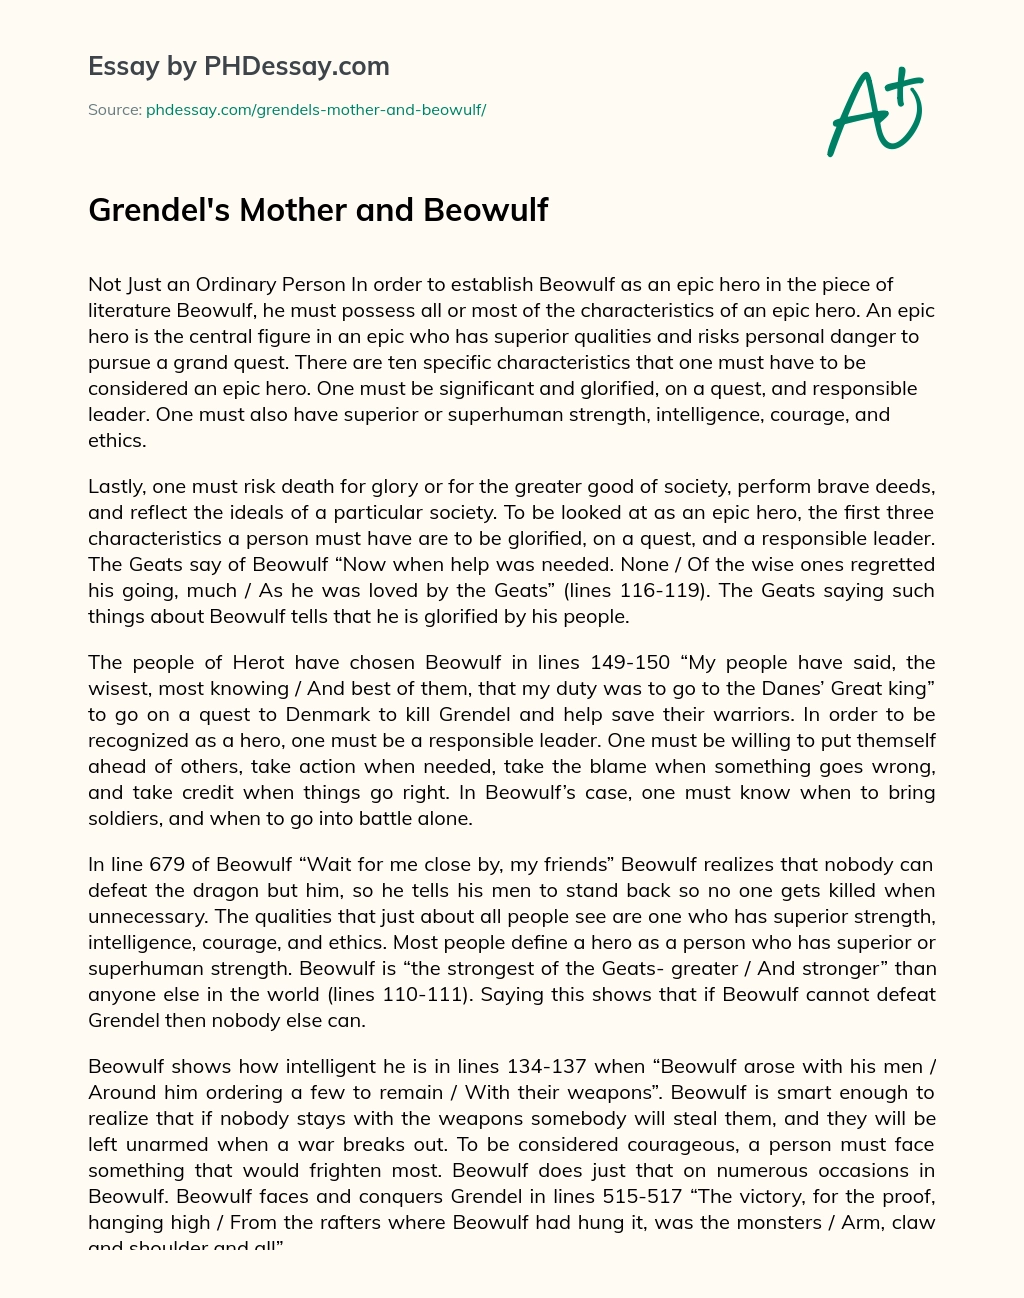 Grendel’s Mother and Beowulf essay